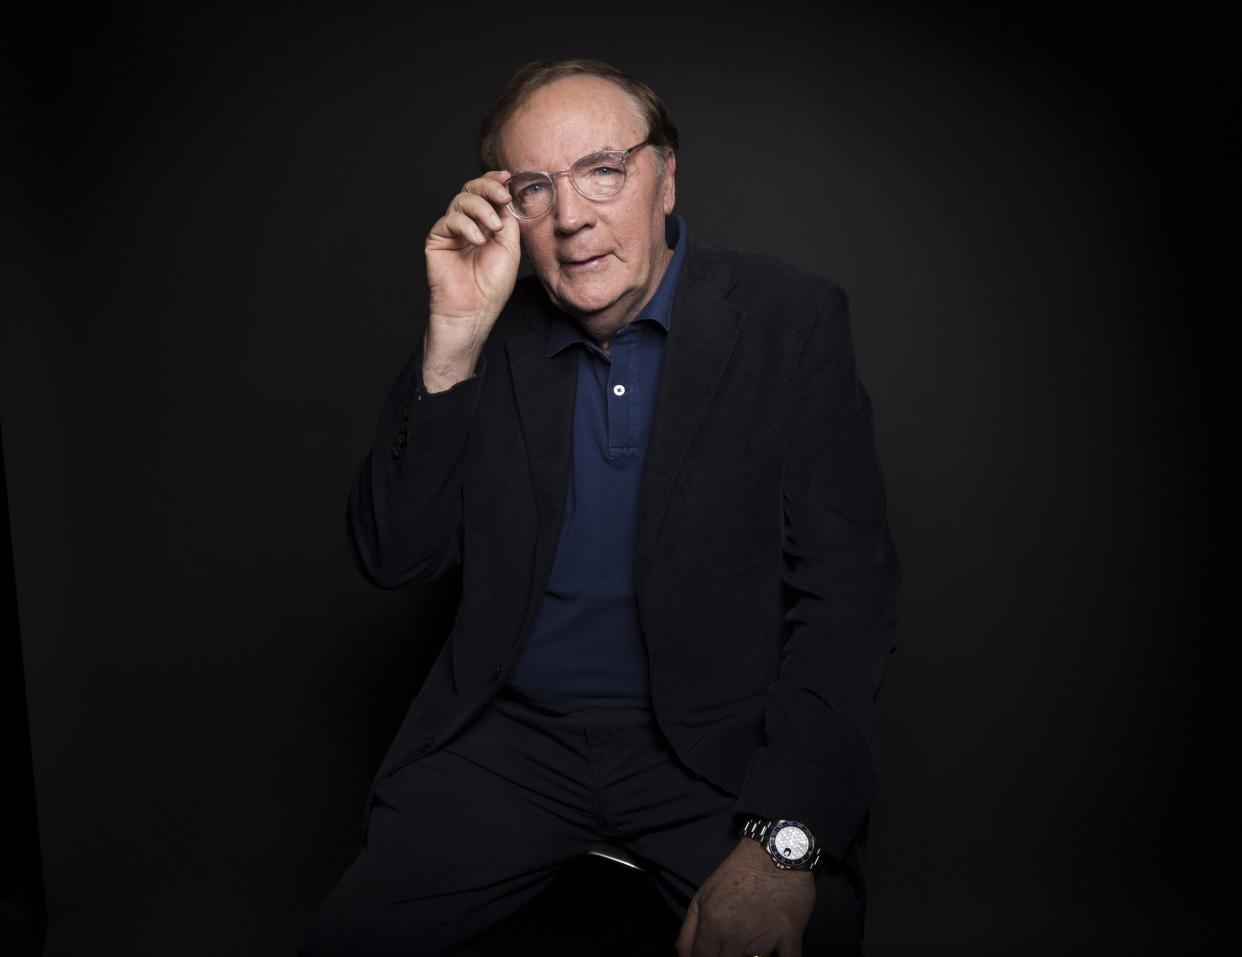 Best-selling author James Patterson will be a guest of Willard Library when he speaks about his memoir at W.K. Kellogg Auditorium on June 14, 2022.